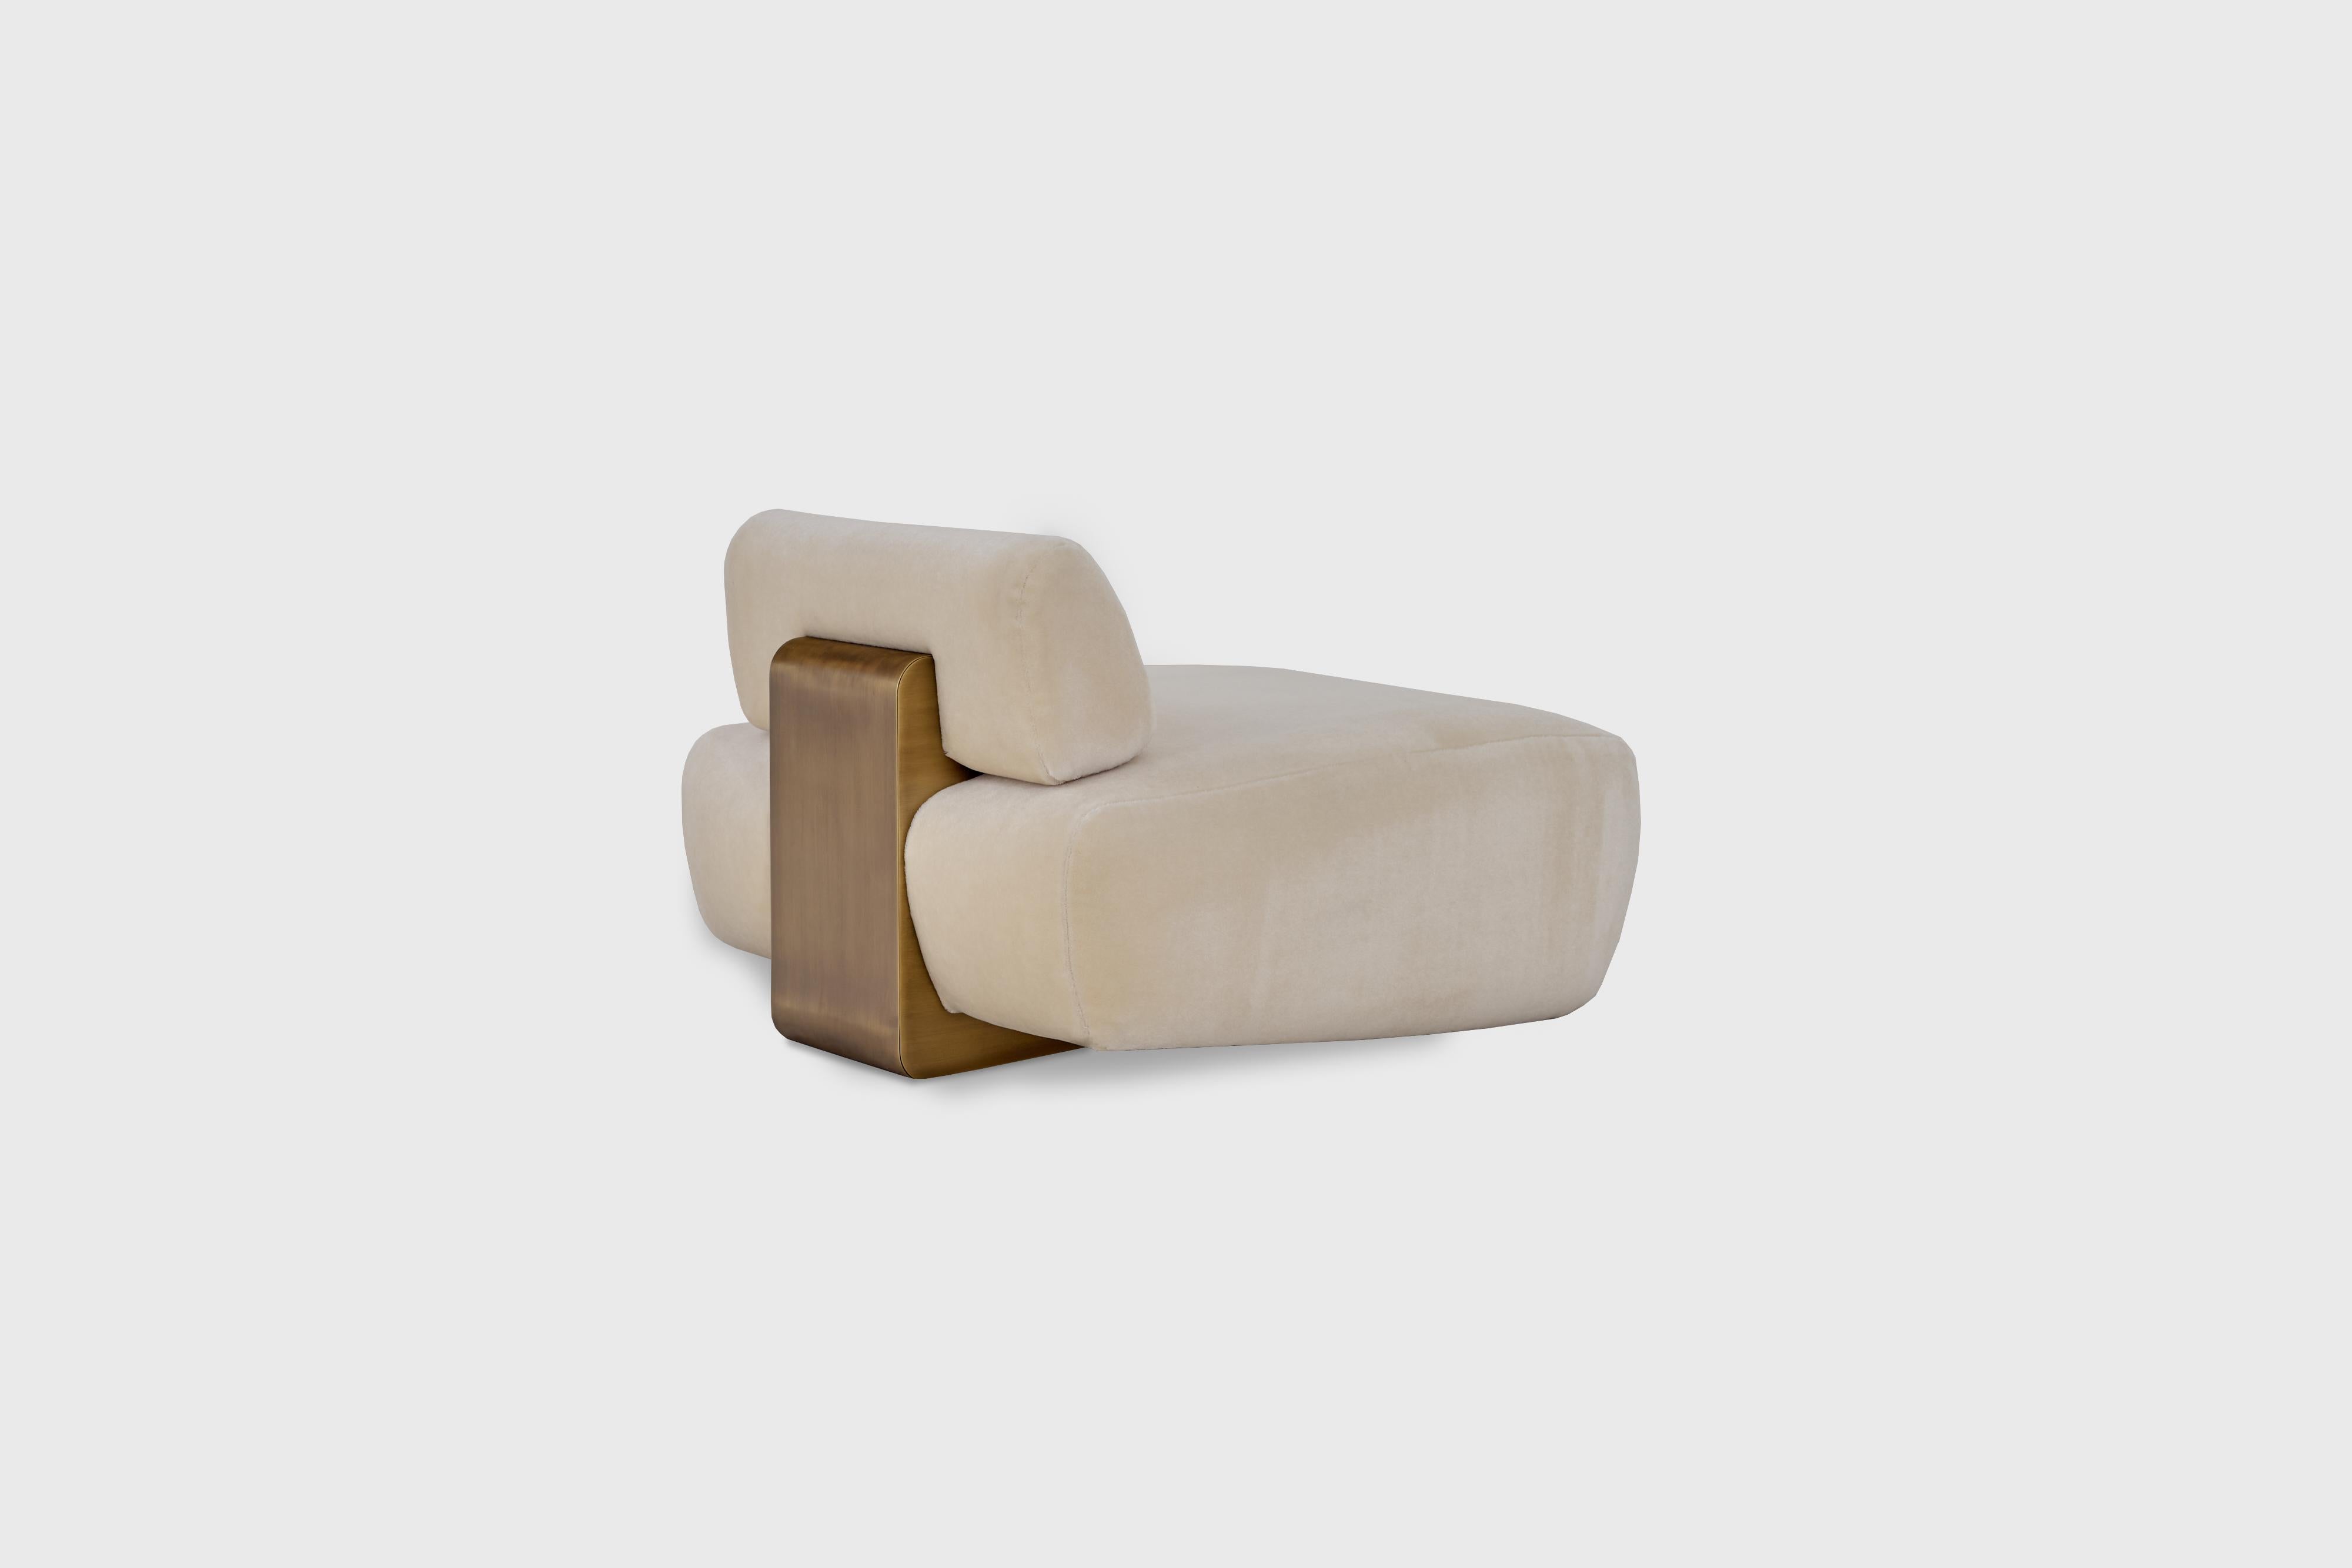 Margot lounge chair by Atra Design.
Dimensions: D 60 x W 94 x H 82 cm.
Materials: fabric, aged brass.

Atra Design
We are Atra, a furniture brand produced by Atra form a mexico city–based high end production facility that also houses our